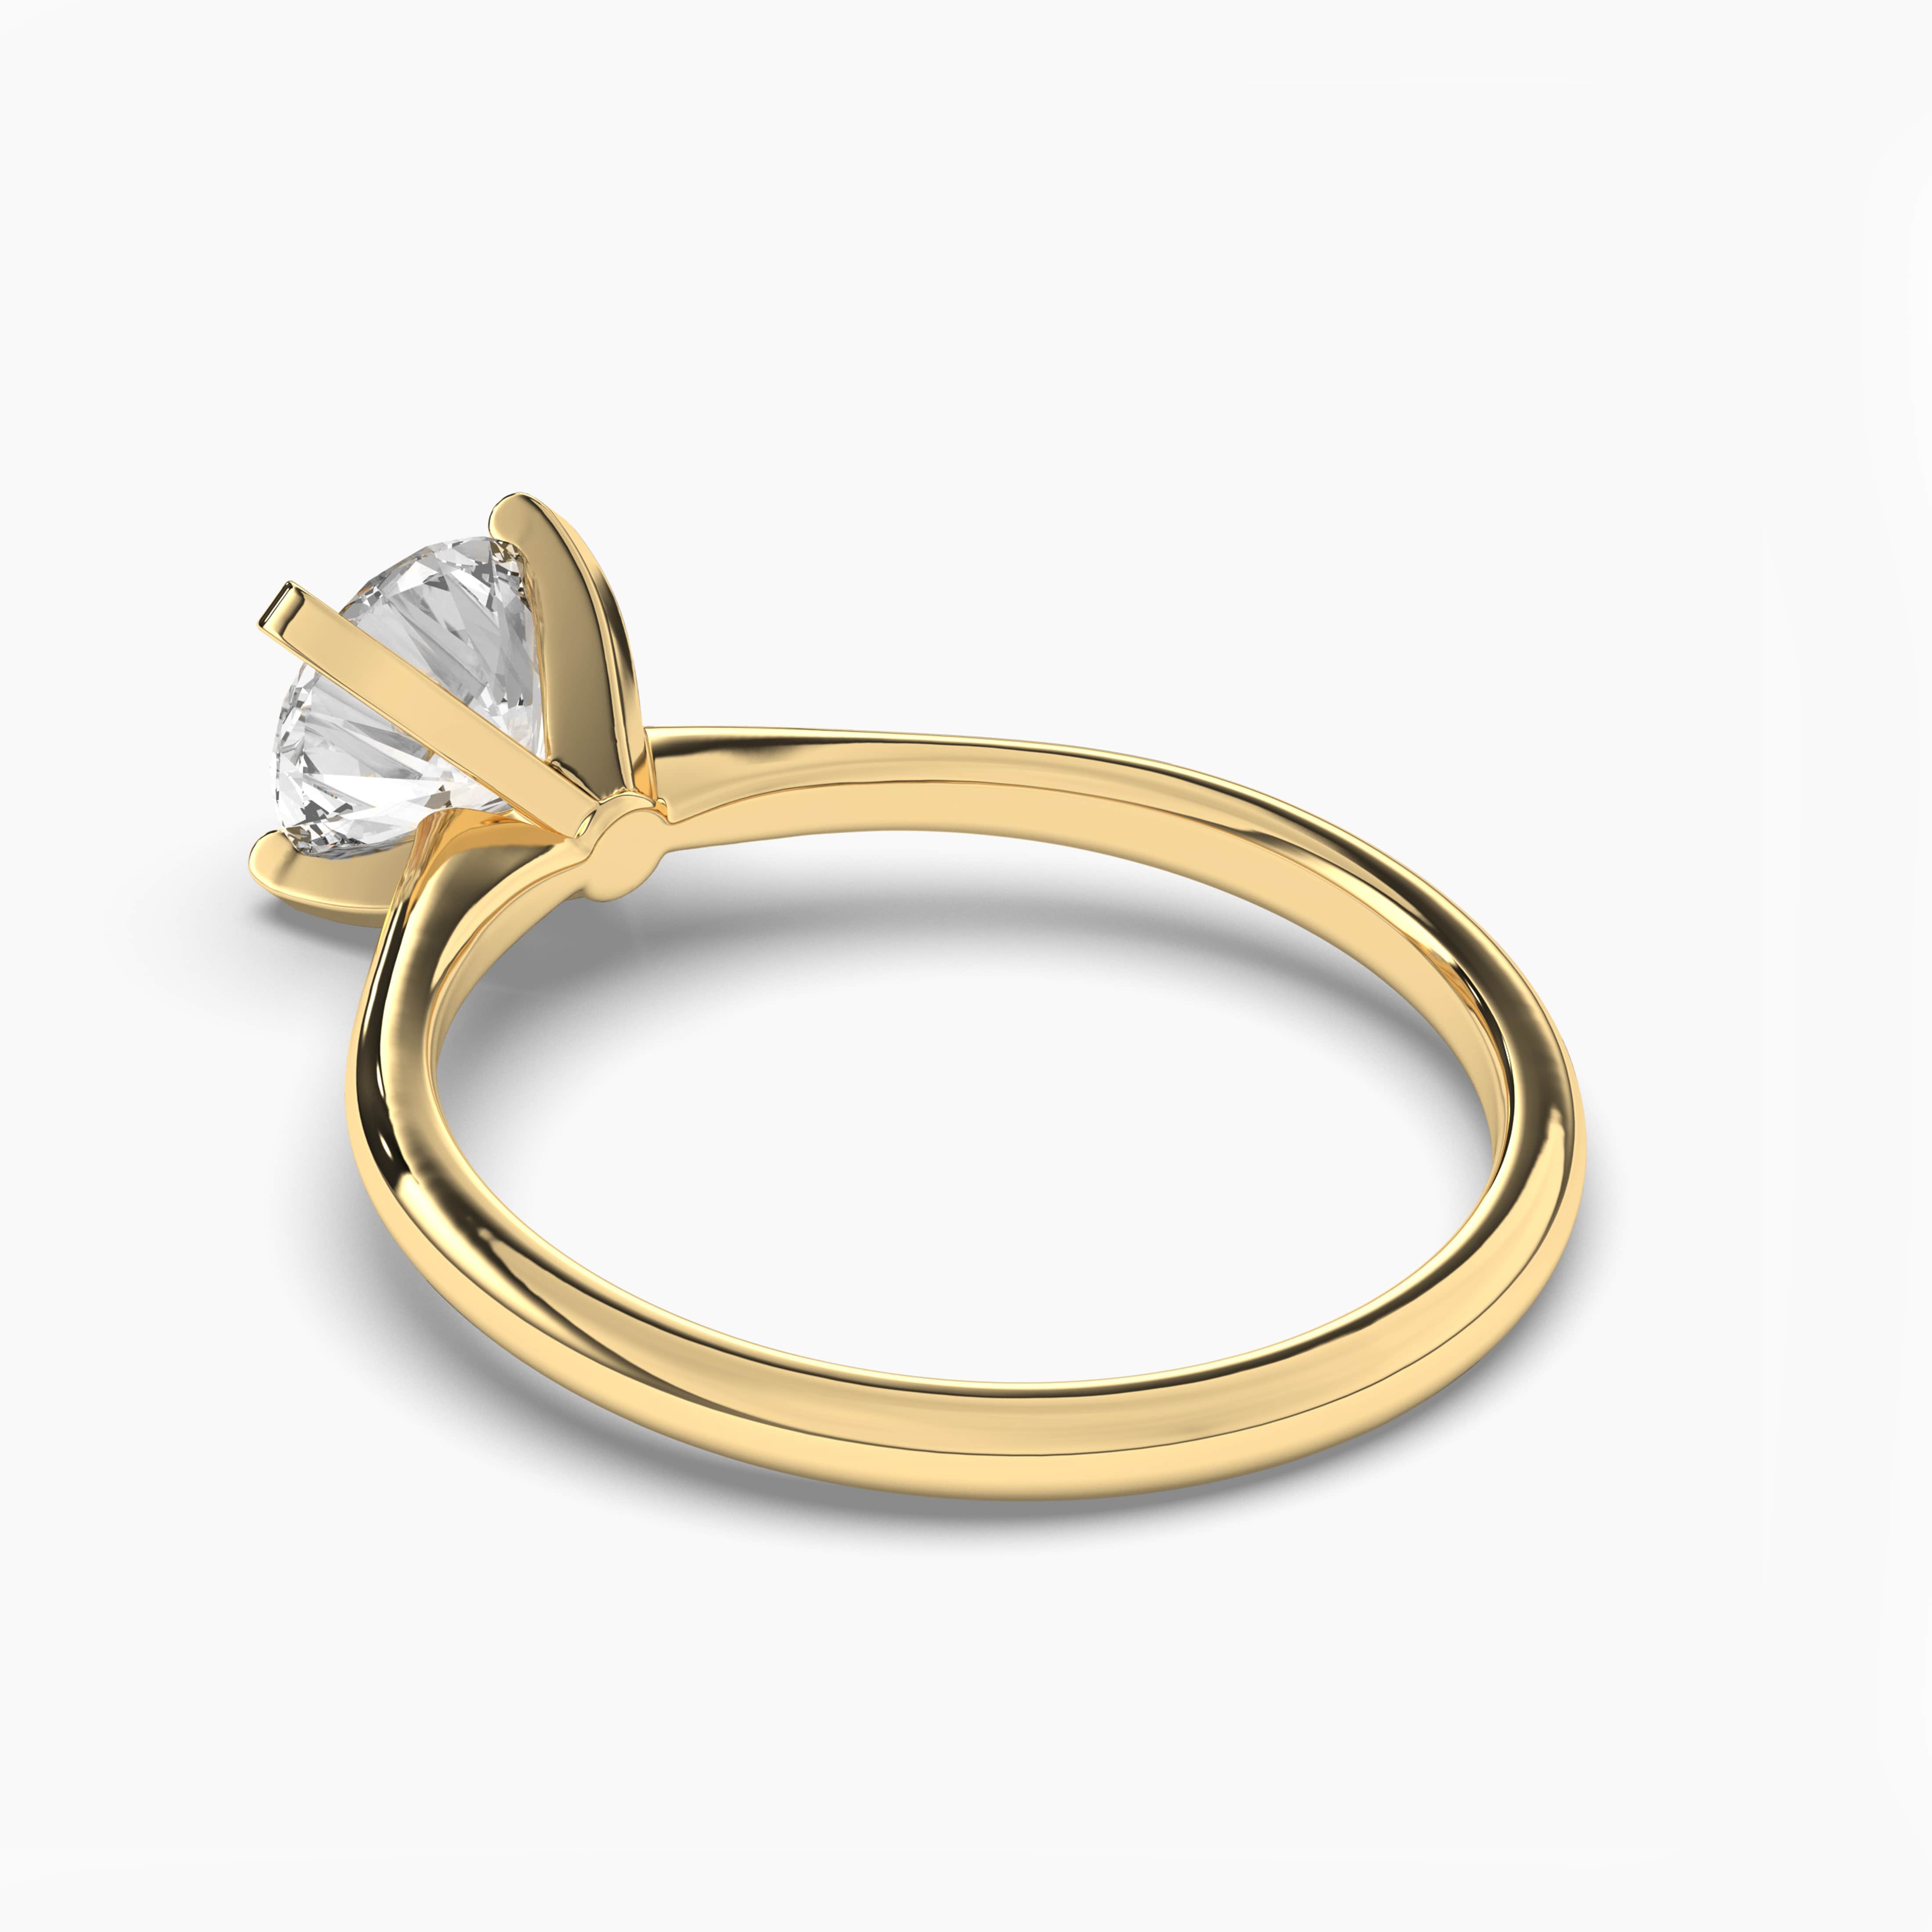 Round Brilliant Cut Diamond and Yellow Gold Ring